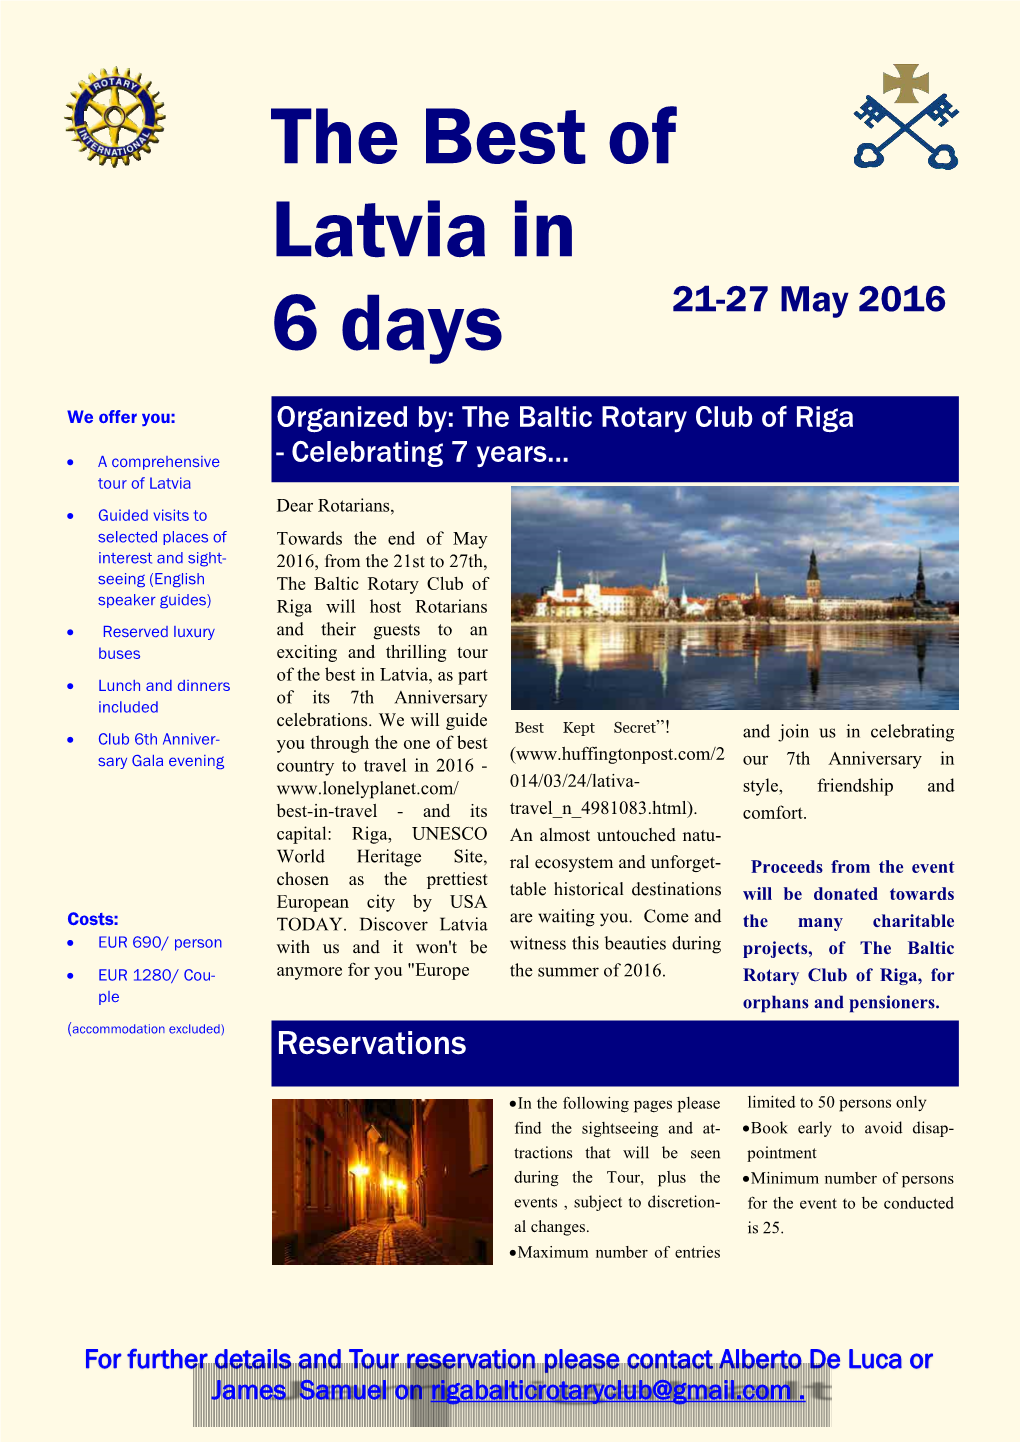 The Best of Latvia in 6 Days 21-27 May 2016